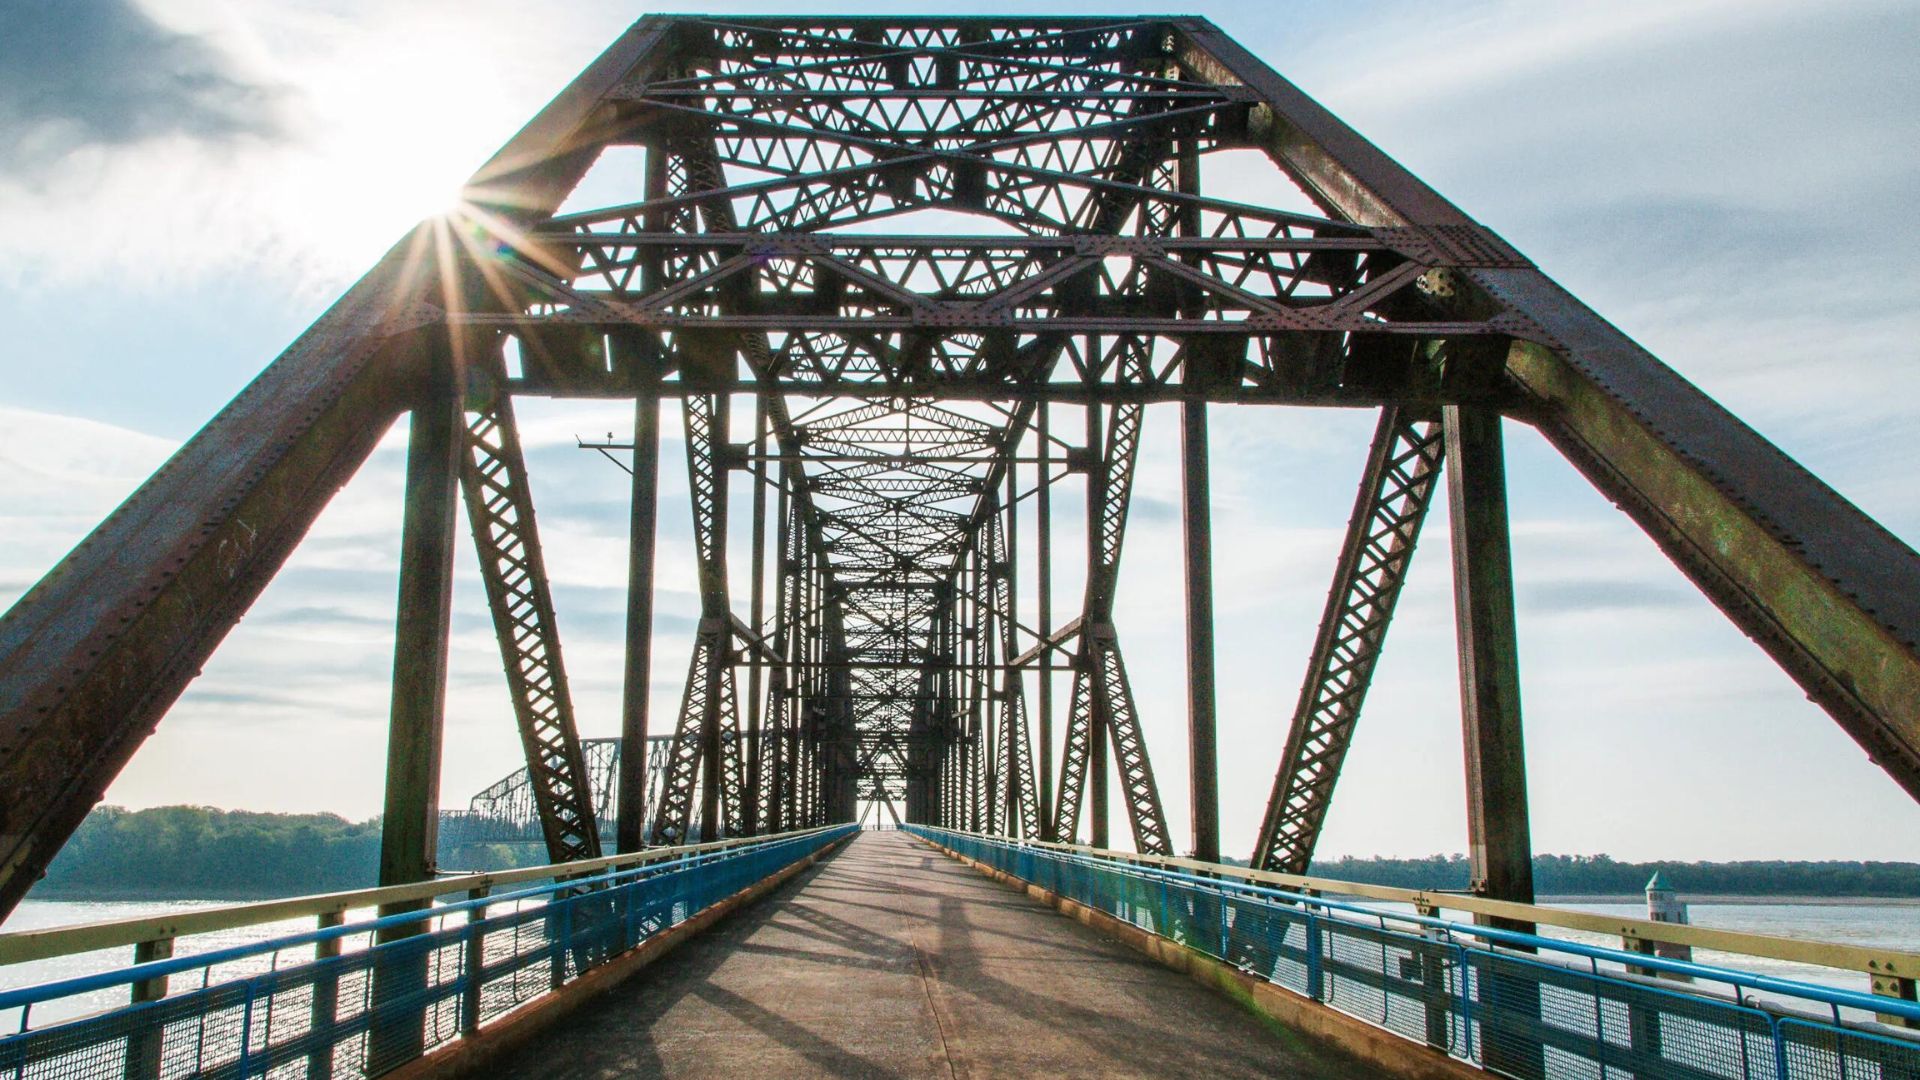 The Old Chain of Rocks Bridge was the original Mississippi River crossing on Route 66.